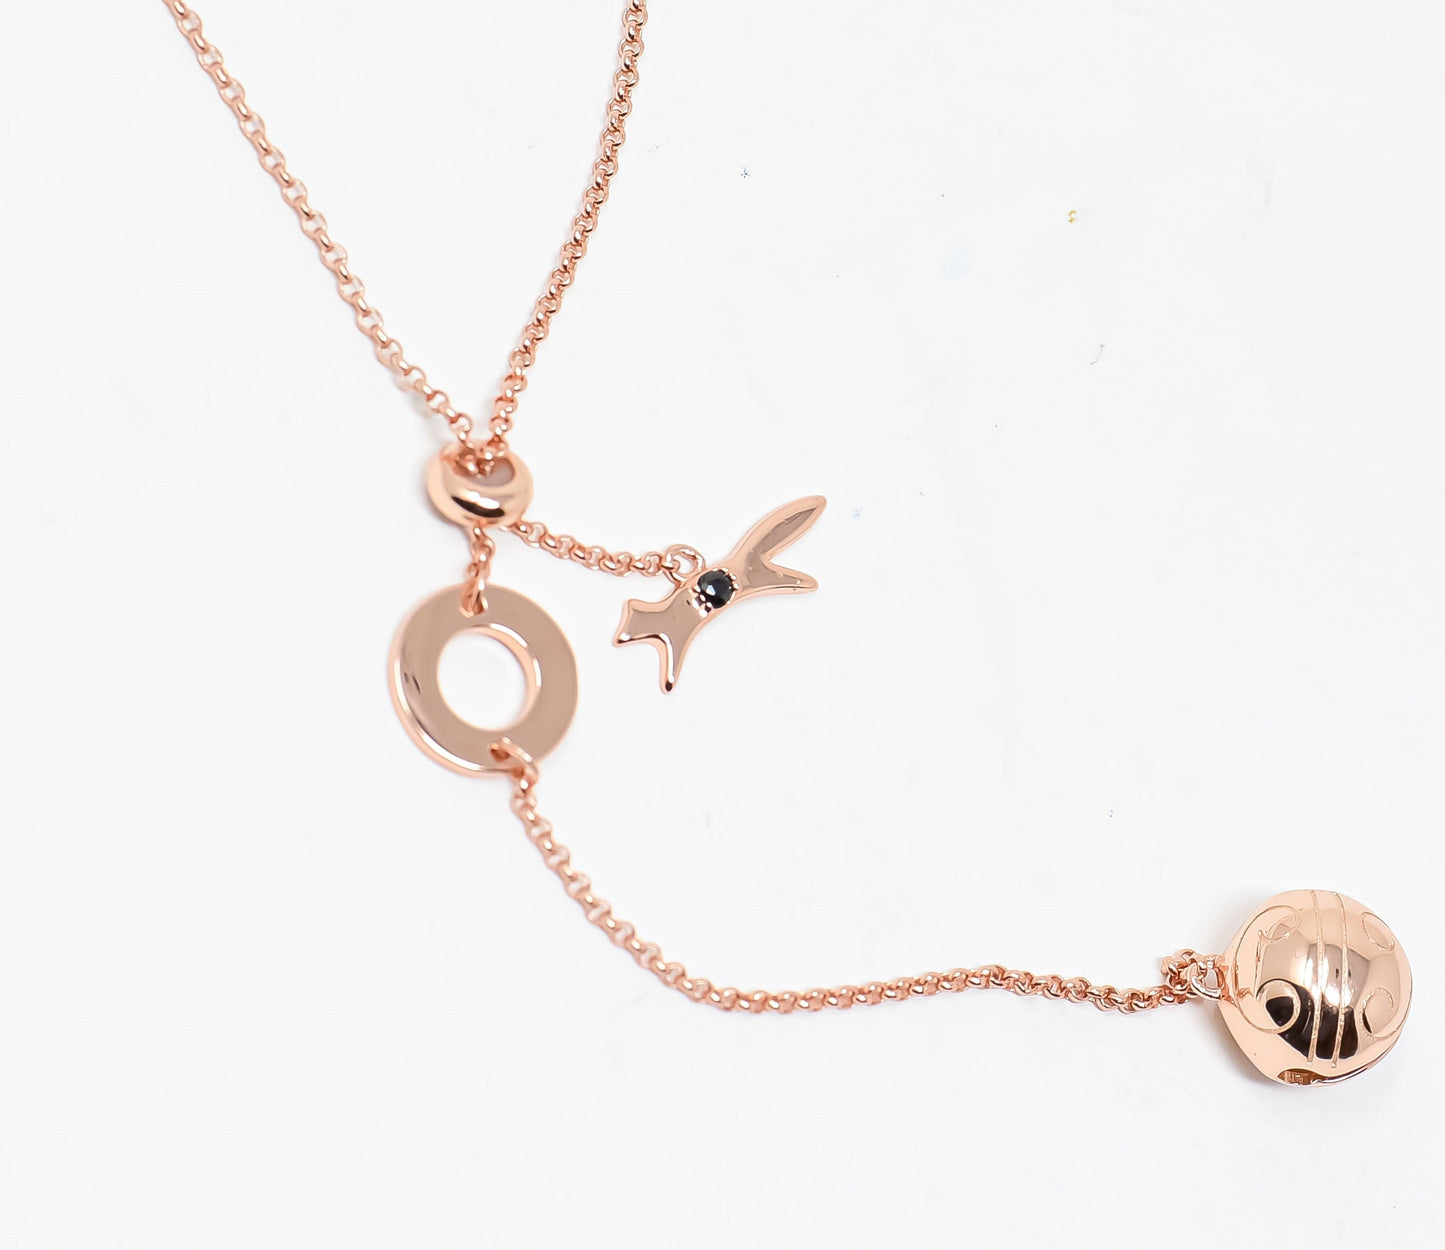 "Fox & Bell" necklace